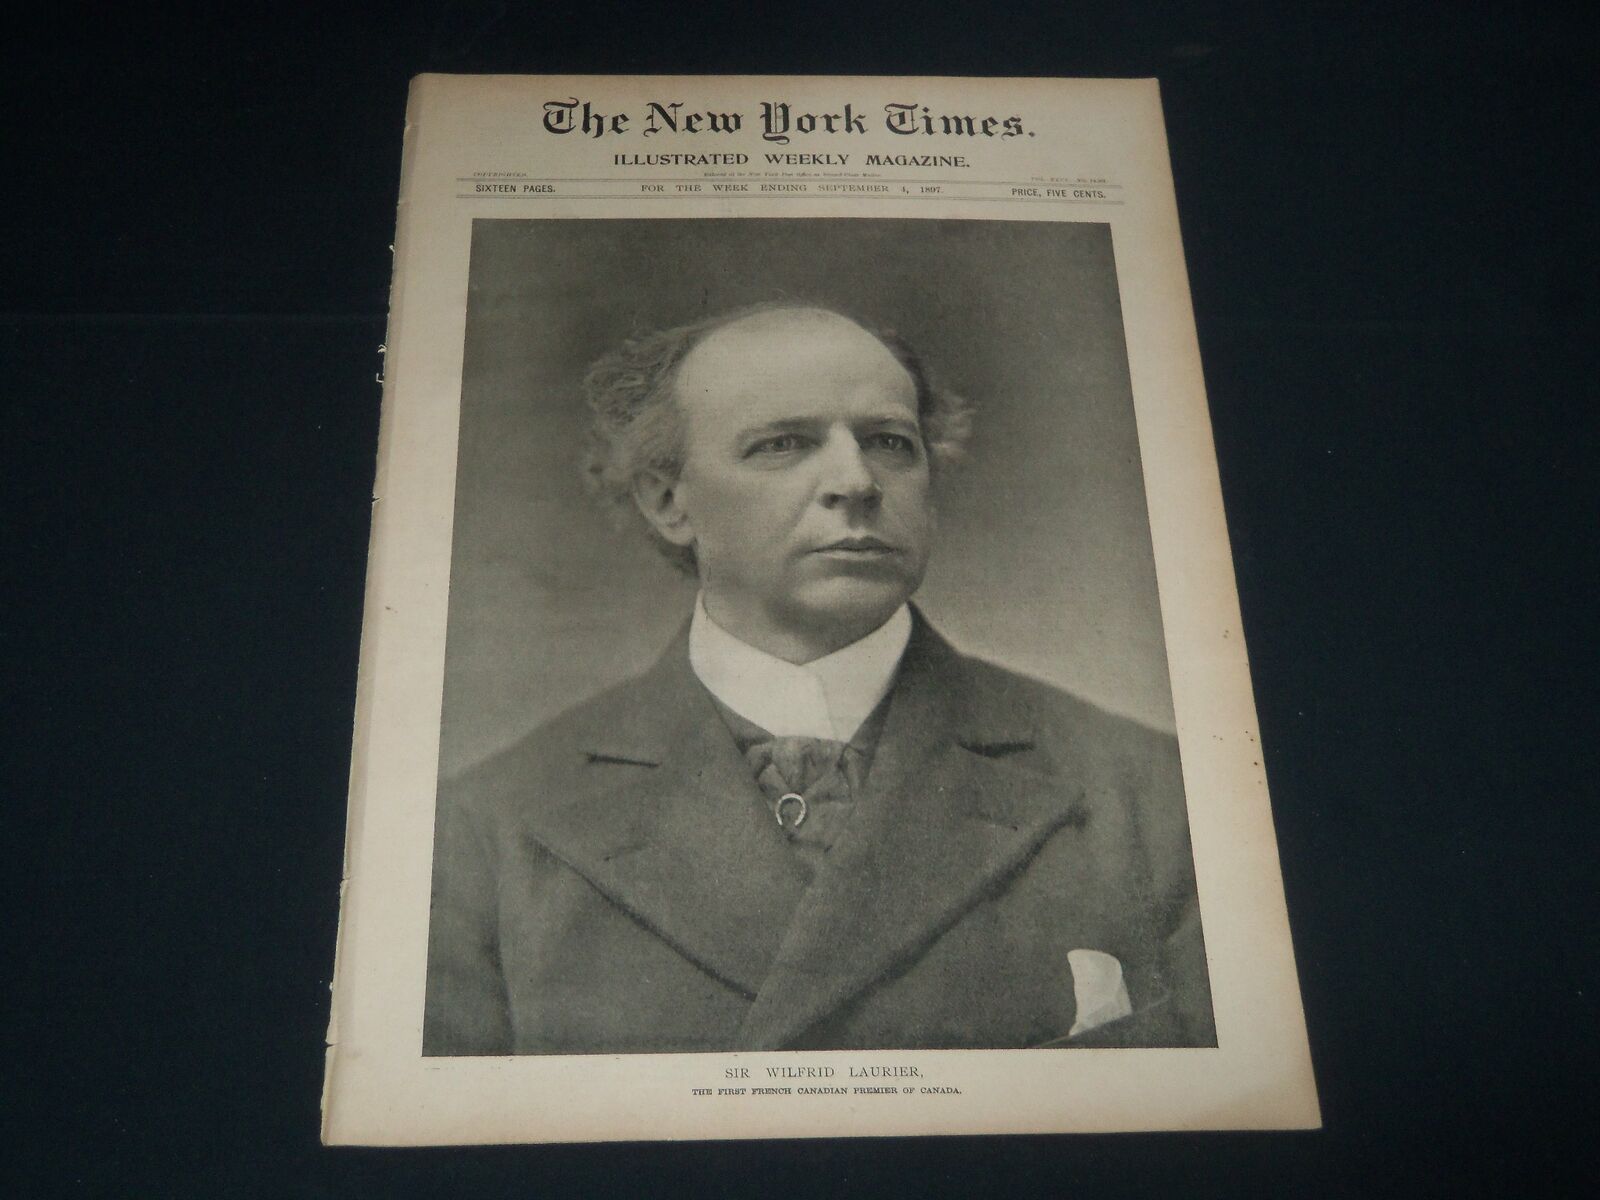 1897 SEPT 4 NEW YORK TIMES ILLUSTRATED MAGAZINE - SIR WILFRID LAURIER - NP 3867